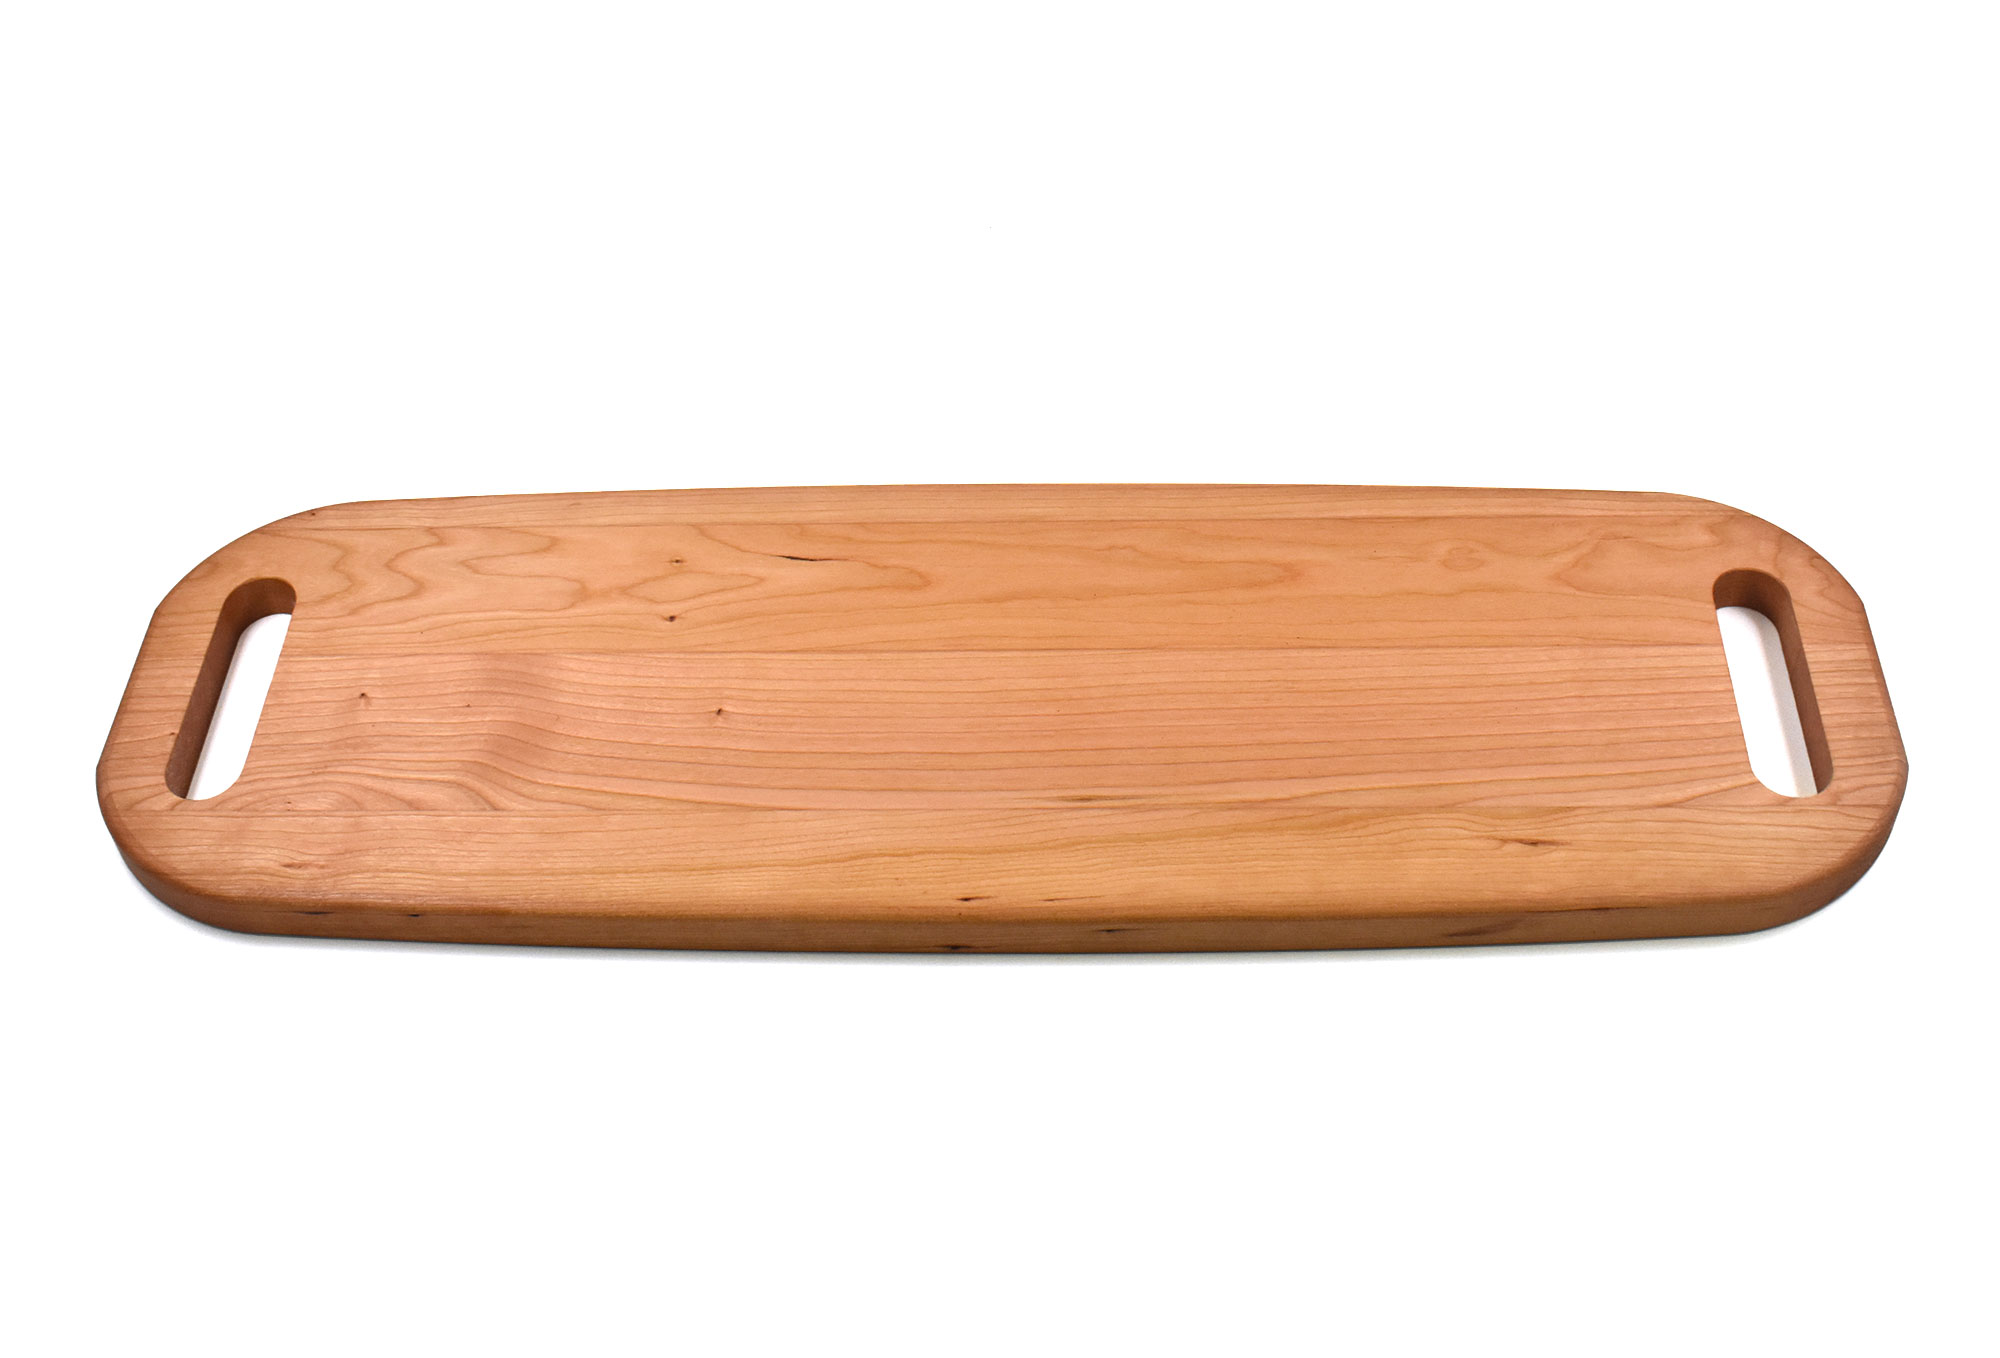 Cherry wood large professional catering charcuterie tray with two handles